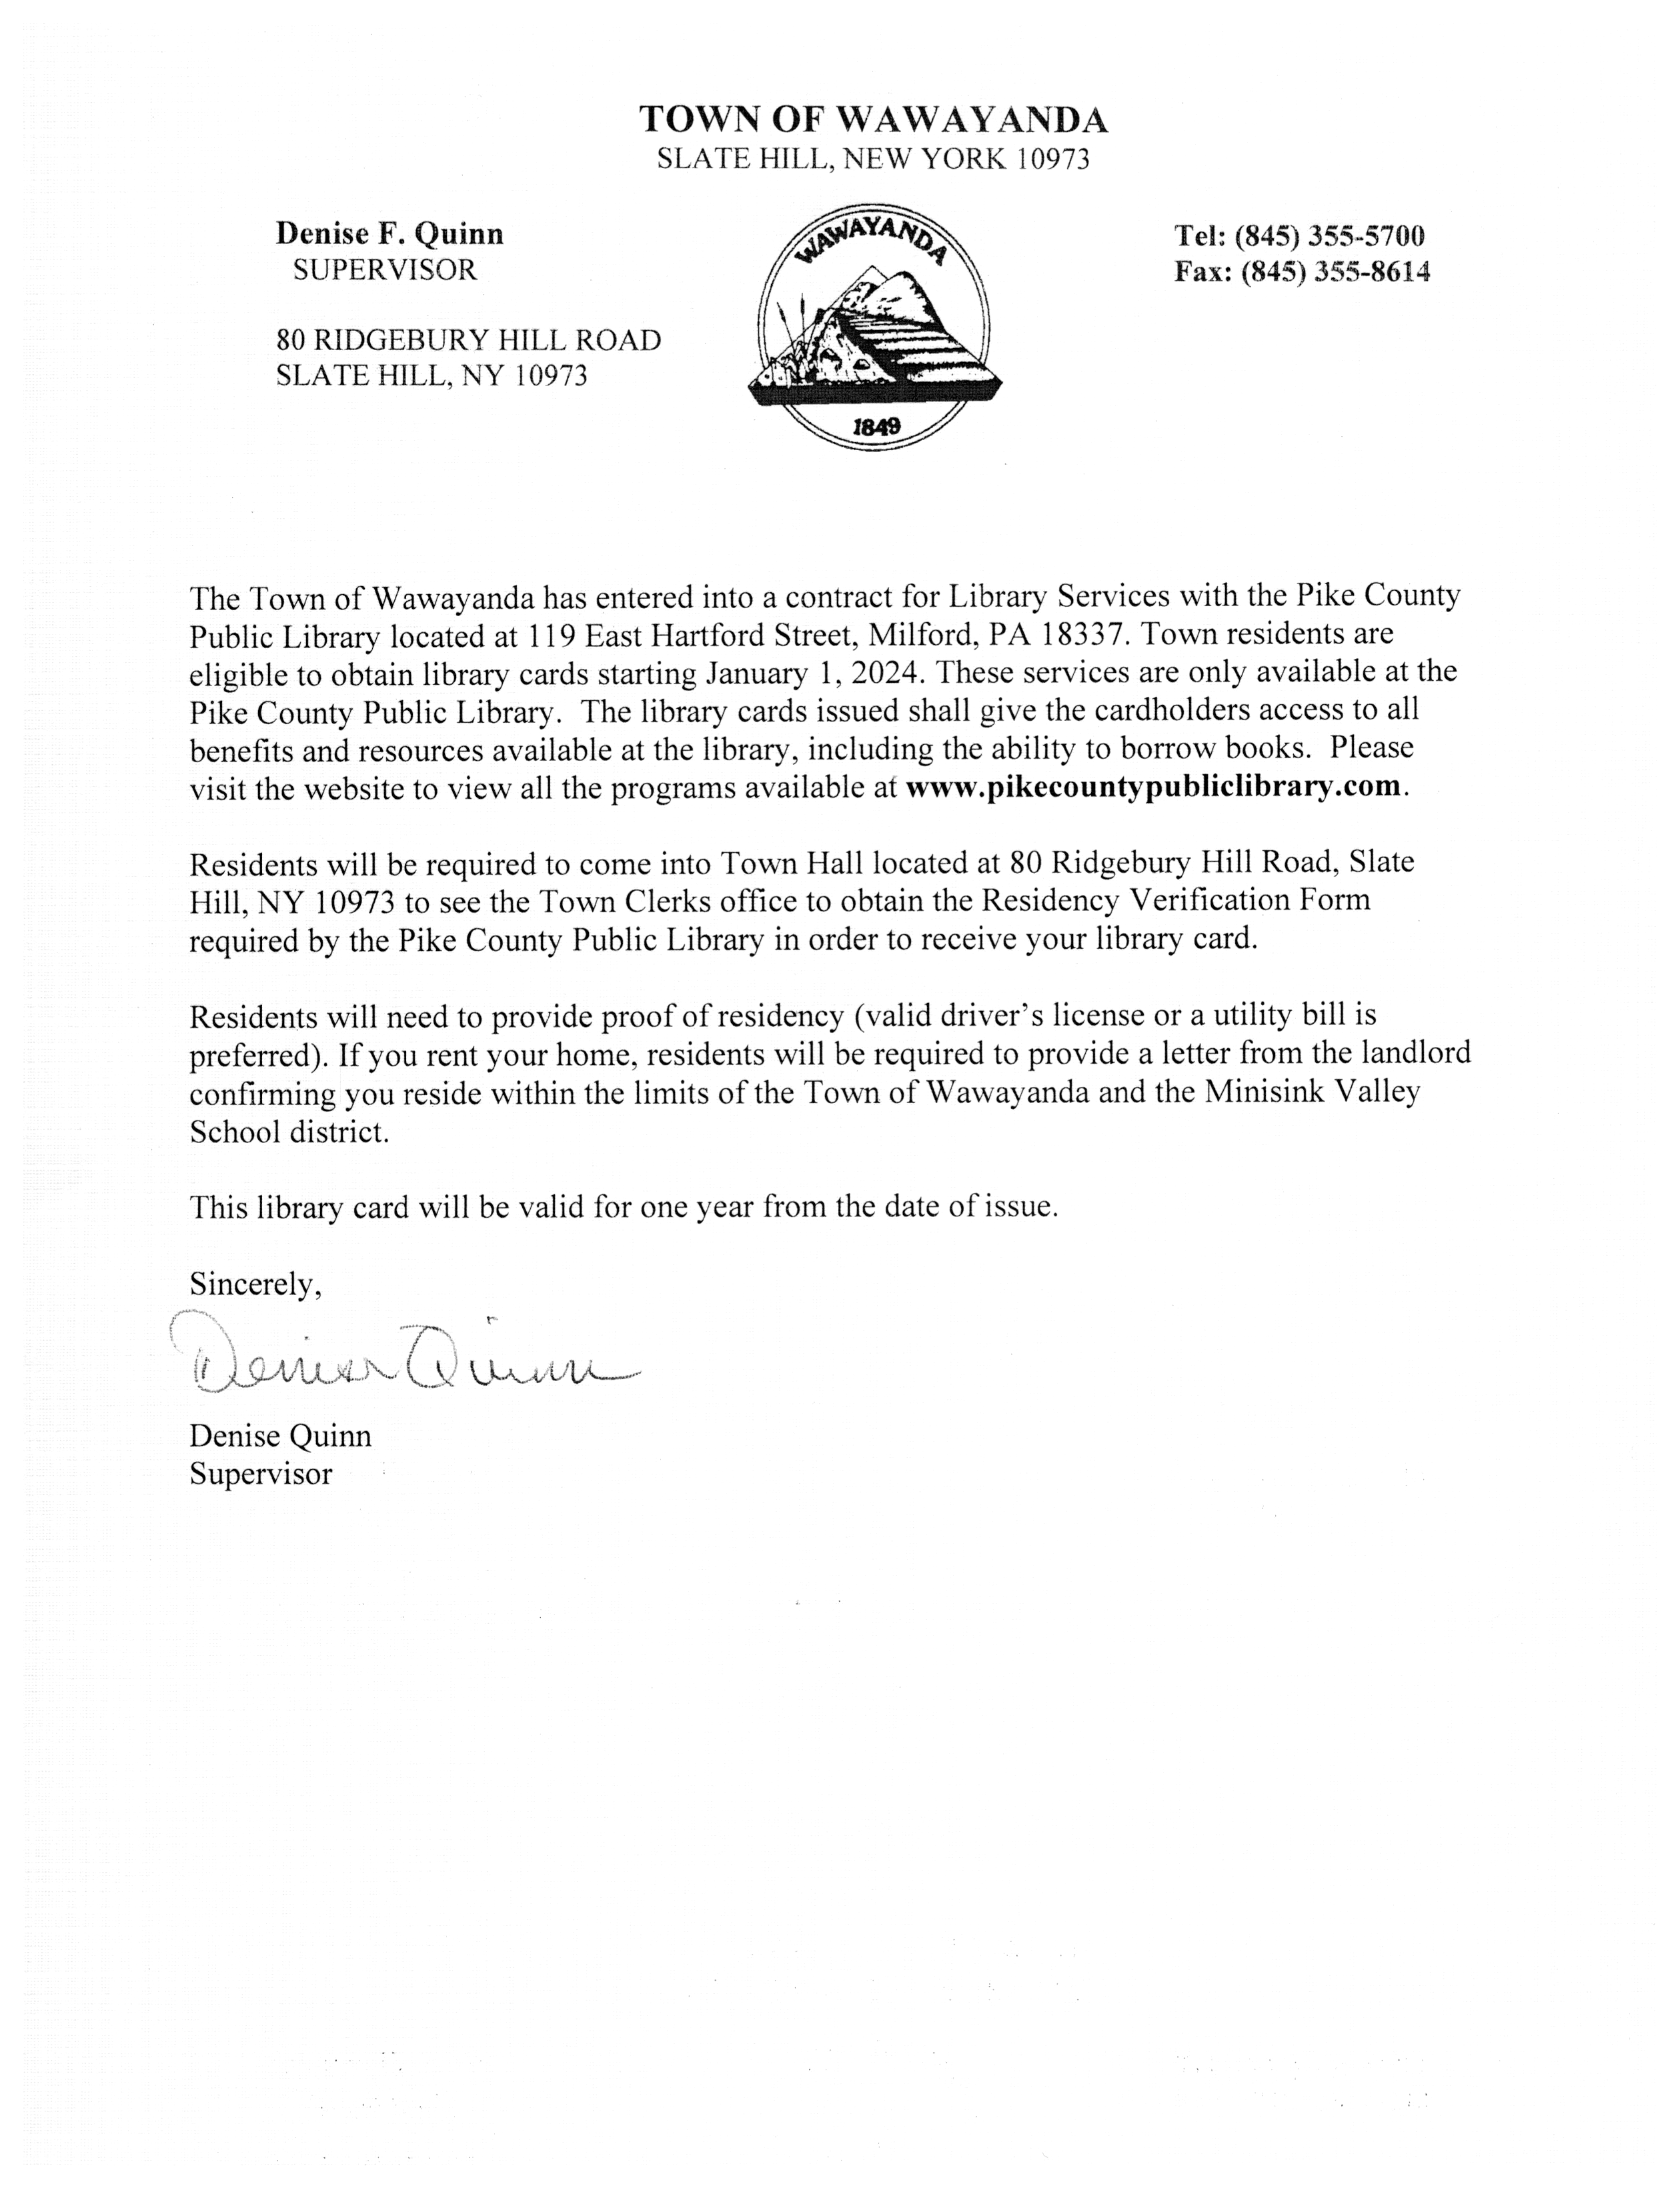 Town of Wawayanda & Pike County Public Library Agreement.png